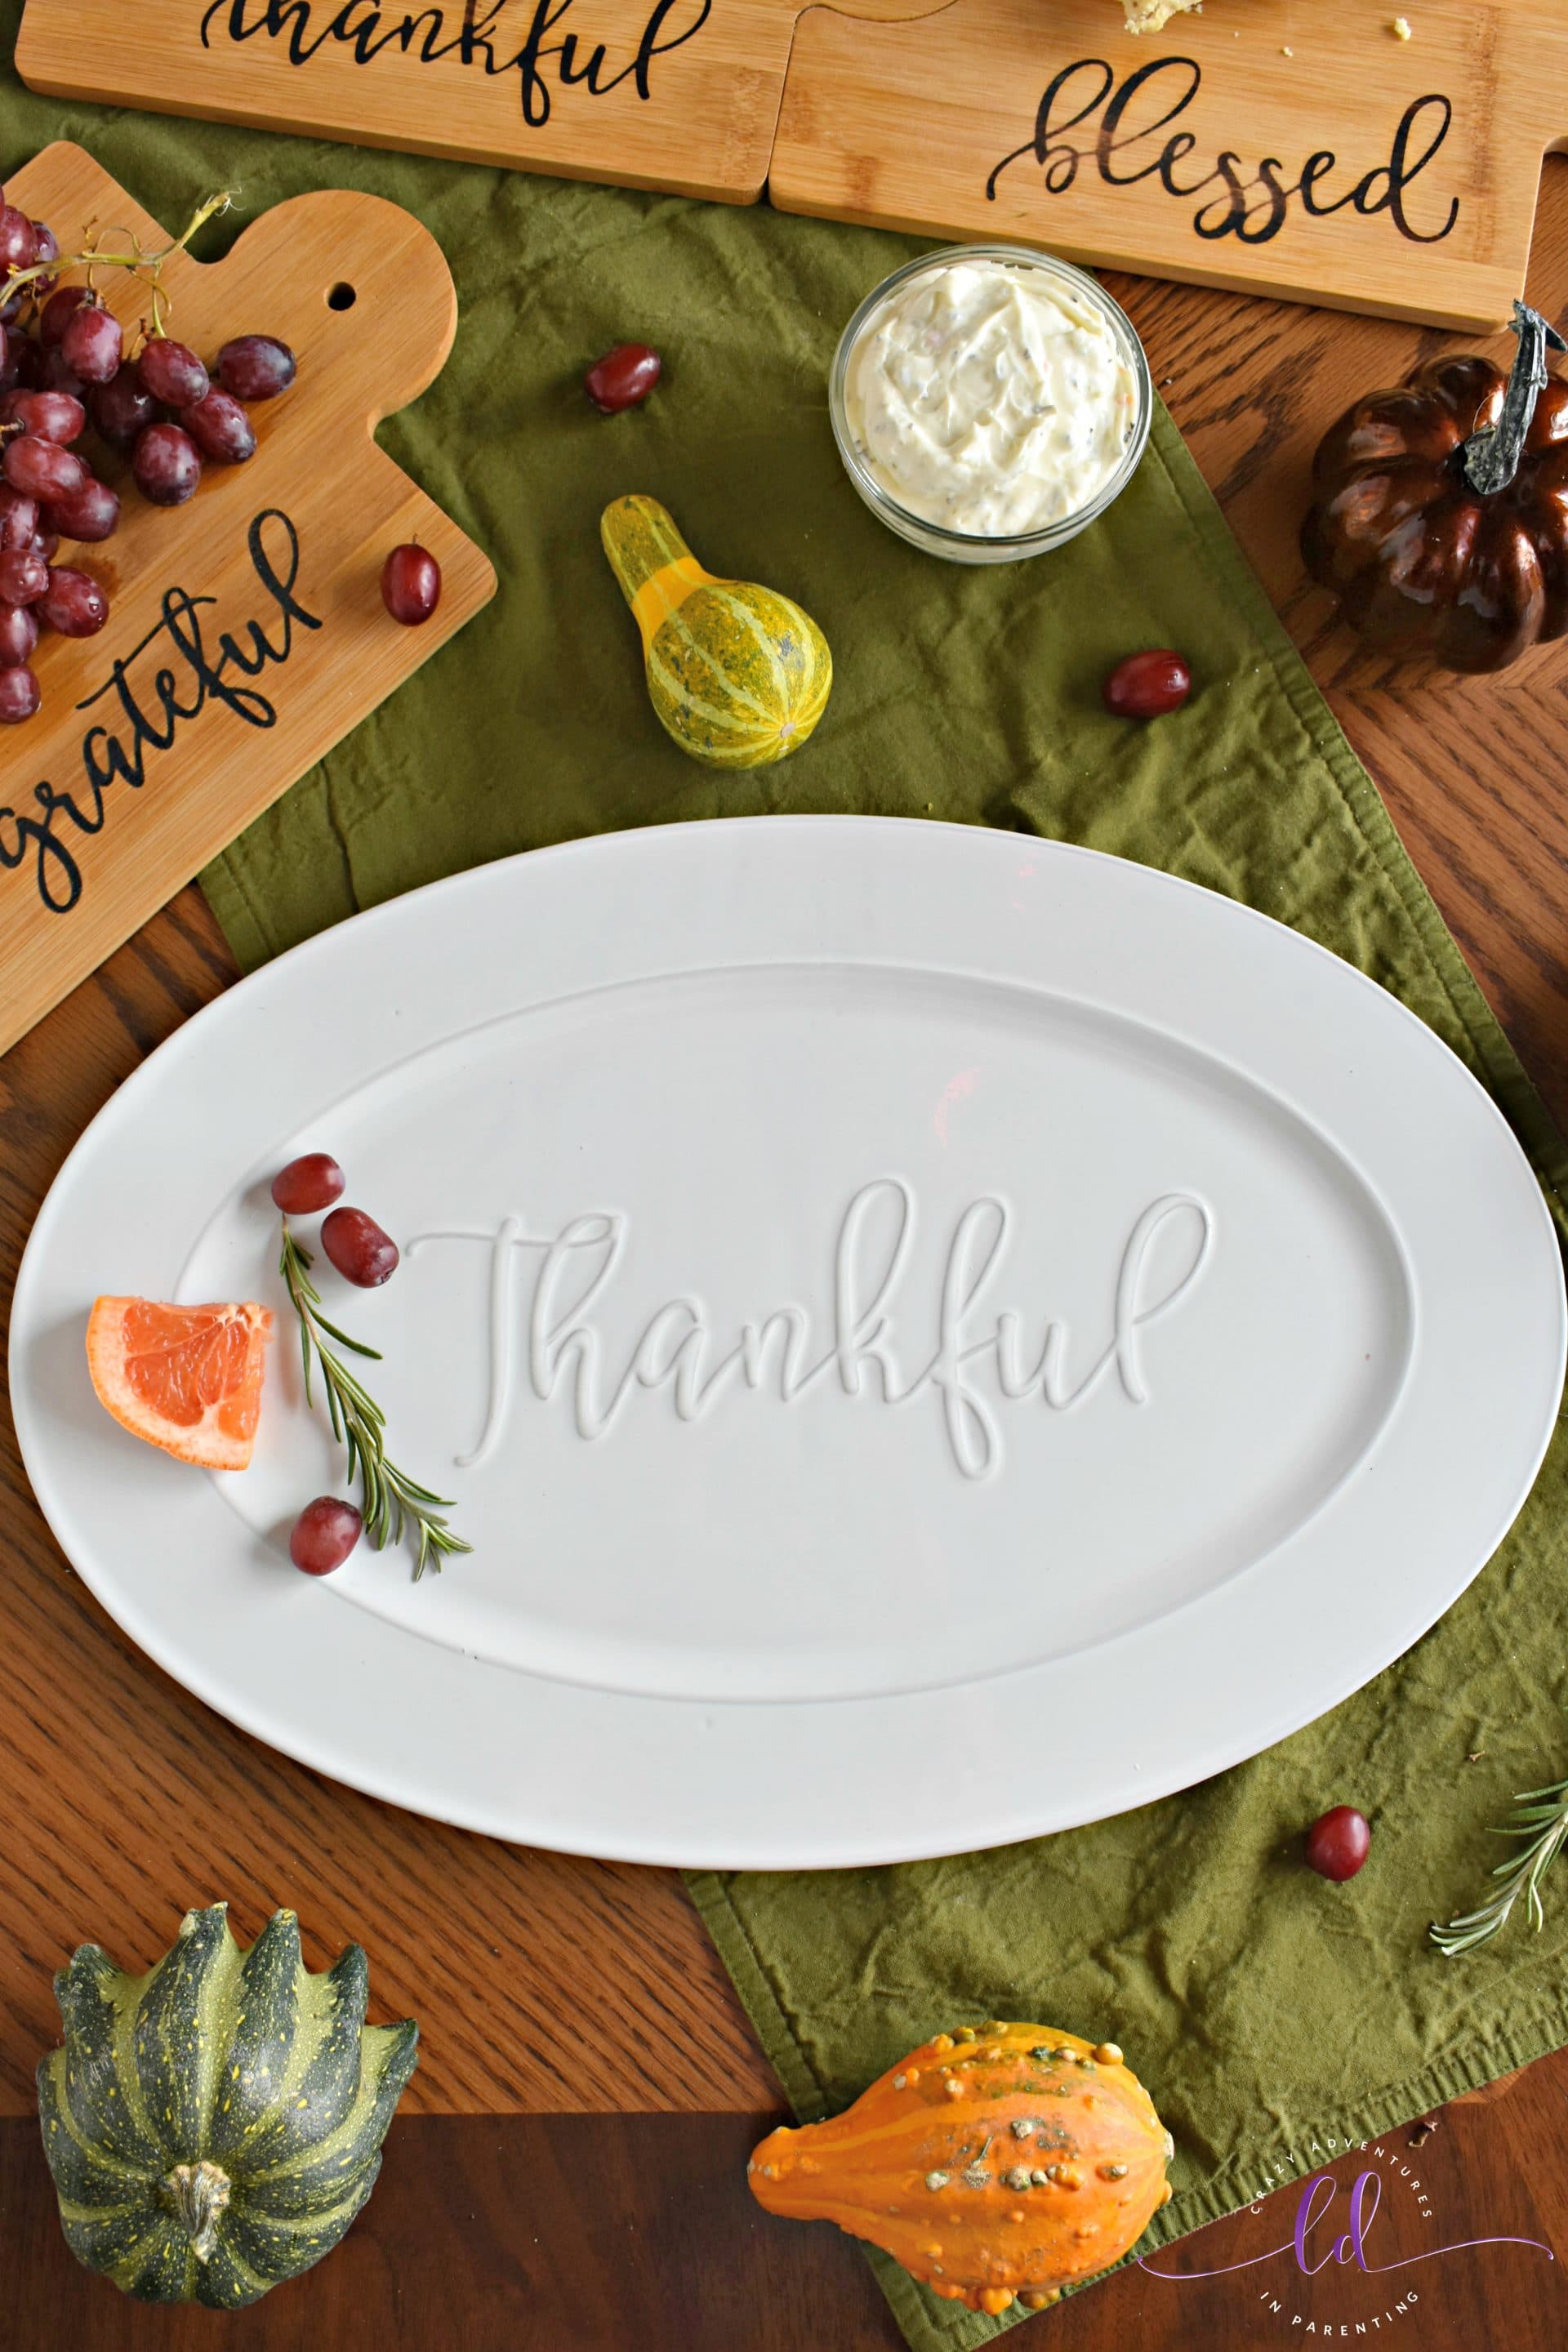 Precious Moments Bountiful Blessings Thankful Ceramic Serving Platter at Bed Bath and Beyond